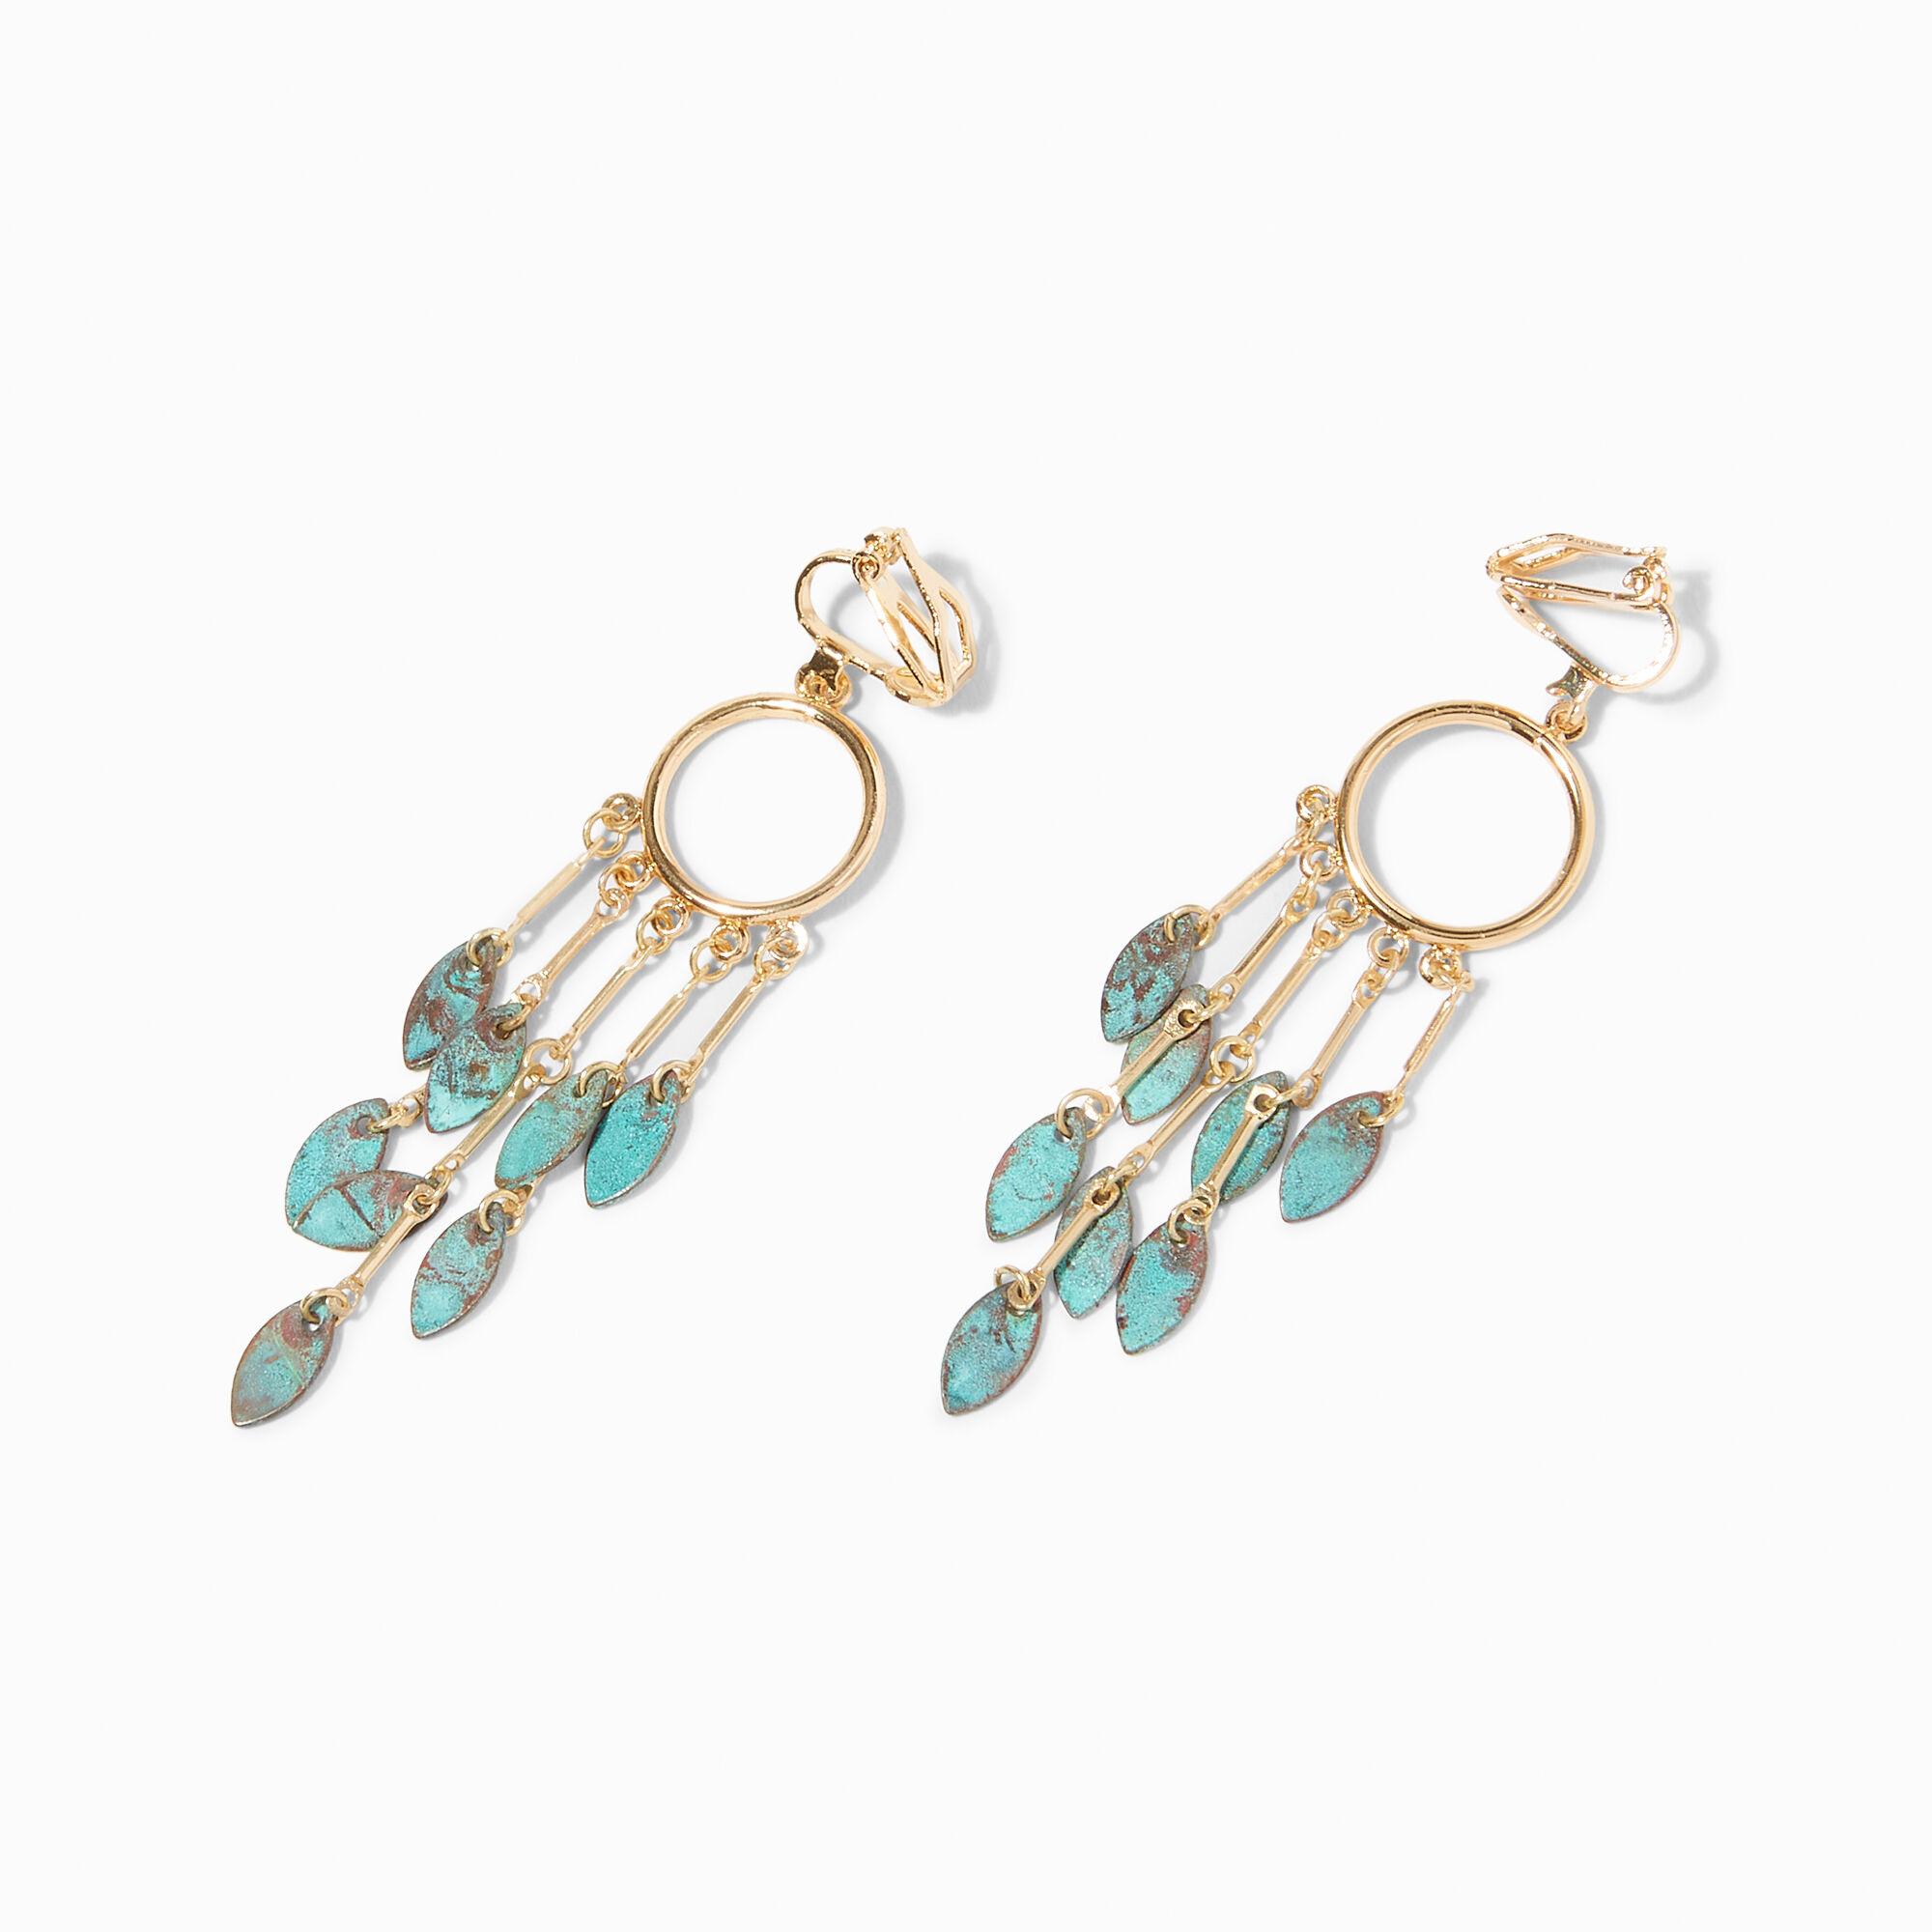 View Claires Patina Leaf 2 ClipOn Drop Earrings Turquoise information